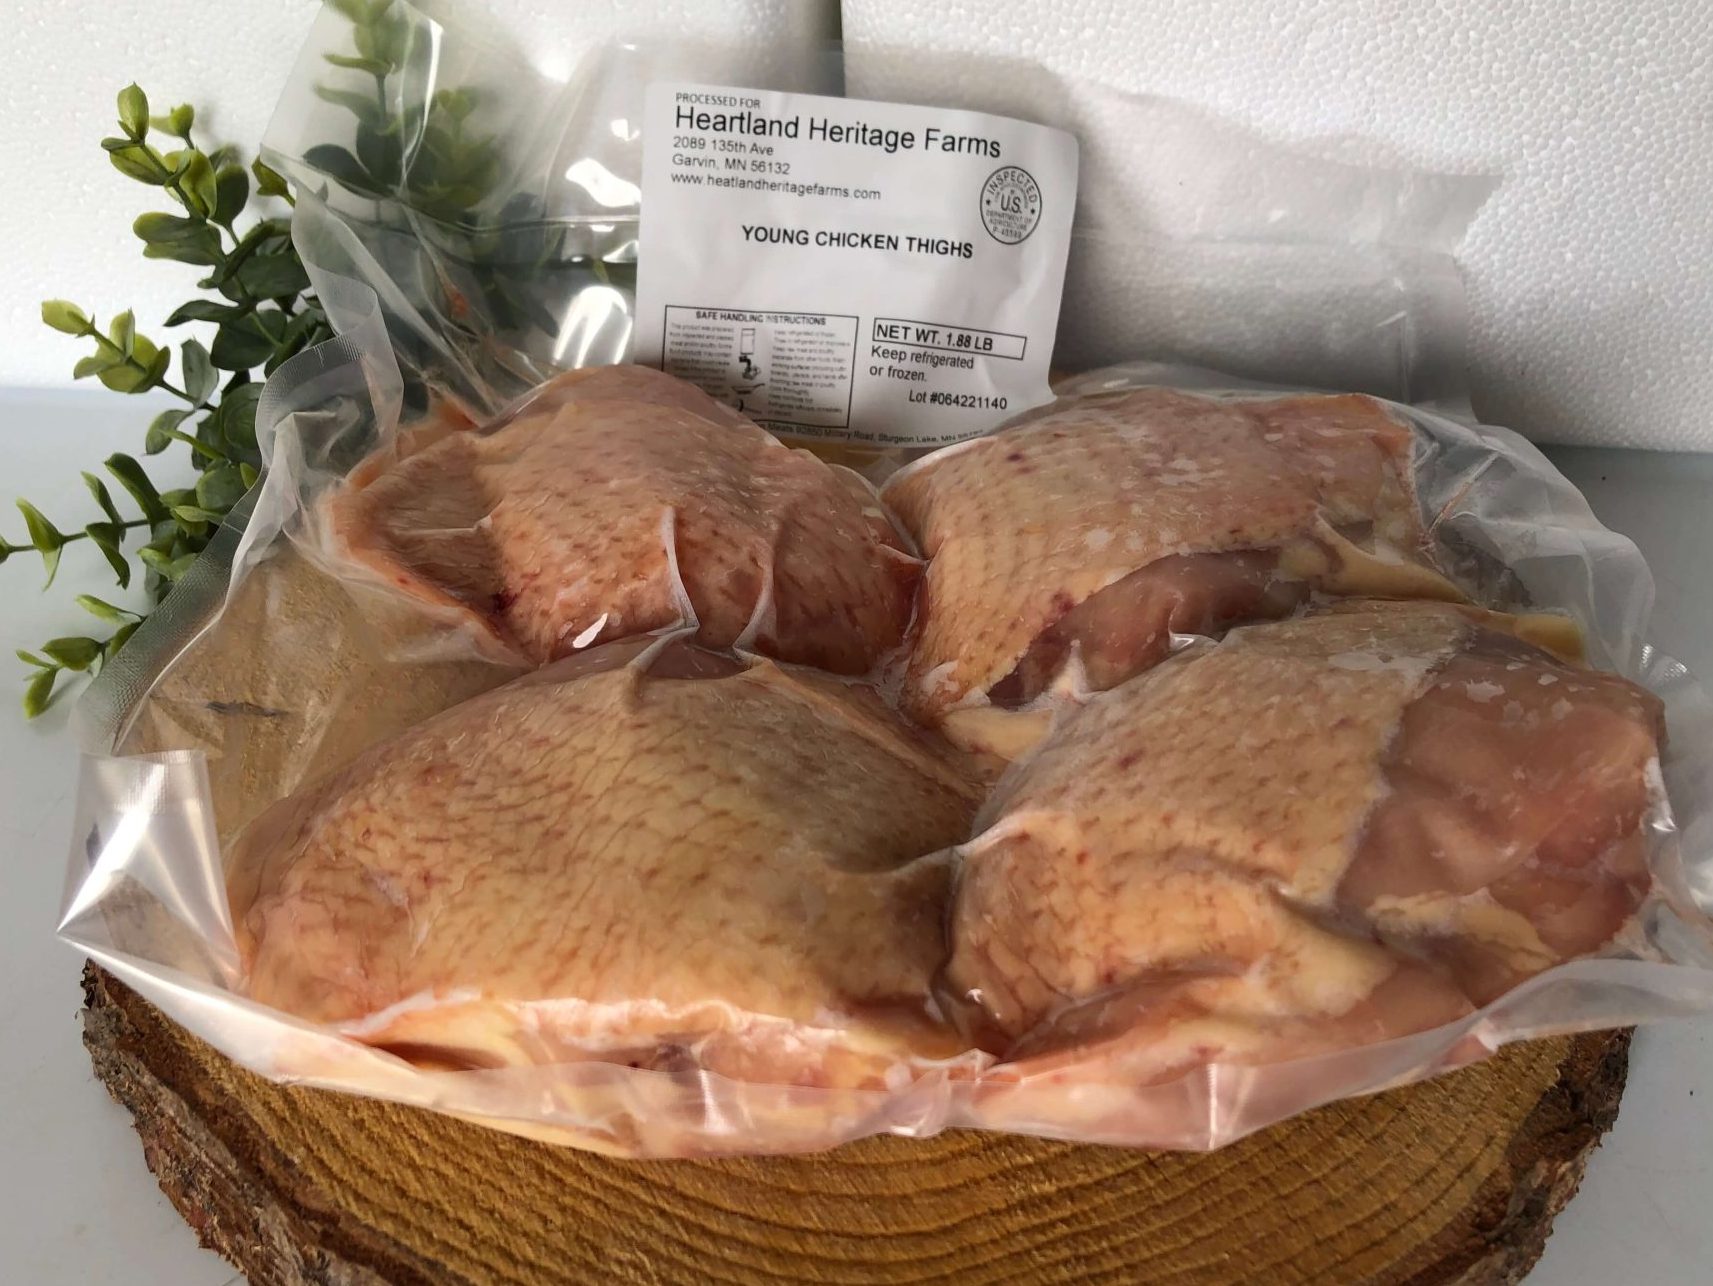 2023 01 16 Submitted Heartland Heritage Farm Chicken Thighs HHF